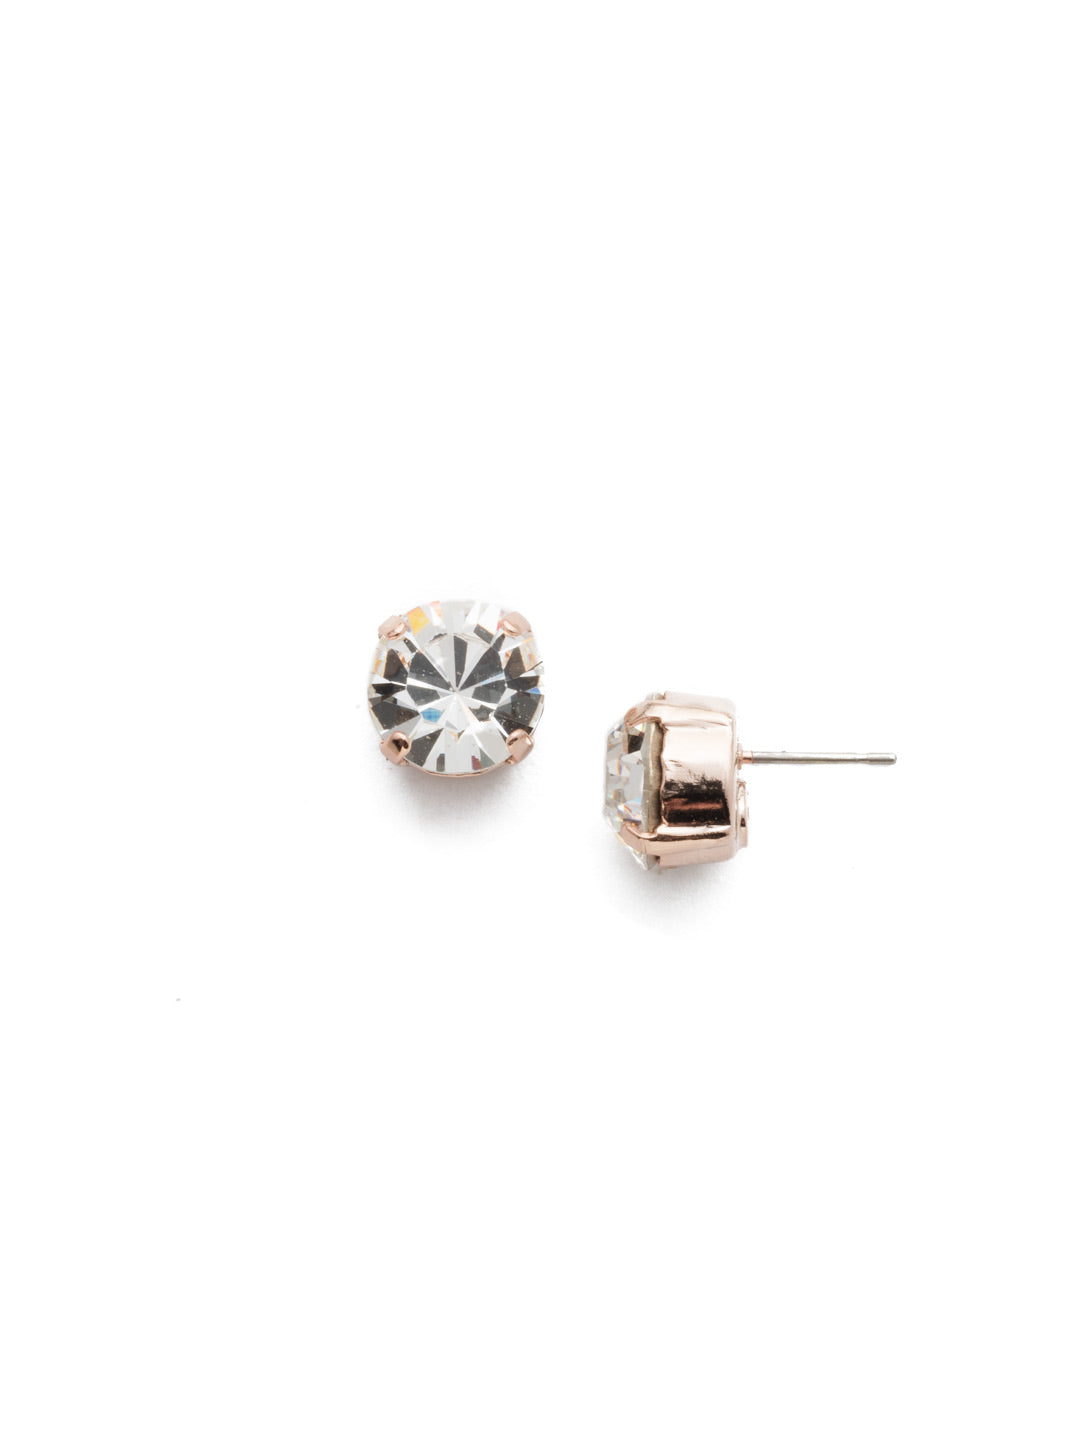 London Stud Earrings - ECM14RGCRY - <p>Everyone needs a great pair of studs. Add some classic sparkle to any occasion with these stud earrings. Need help picking a stud? <a href="https://www.sorrelli.com/blogs/sisterhood/round-stud-earrings-101-a-rundown-of-sizes-styles-and-sparkle">Check out our size guide!</a> From Sorrelli's Crystal collection in our Rose Gold-tone finish.</p>